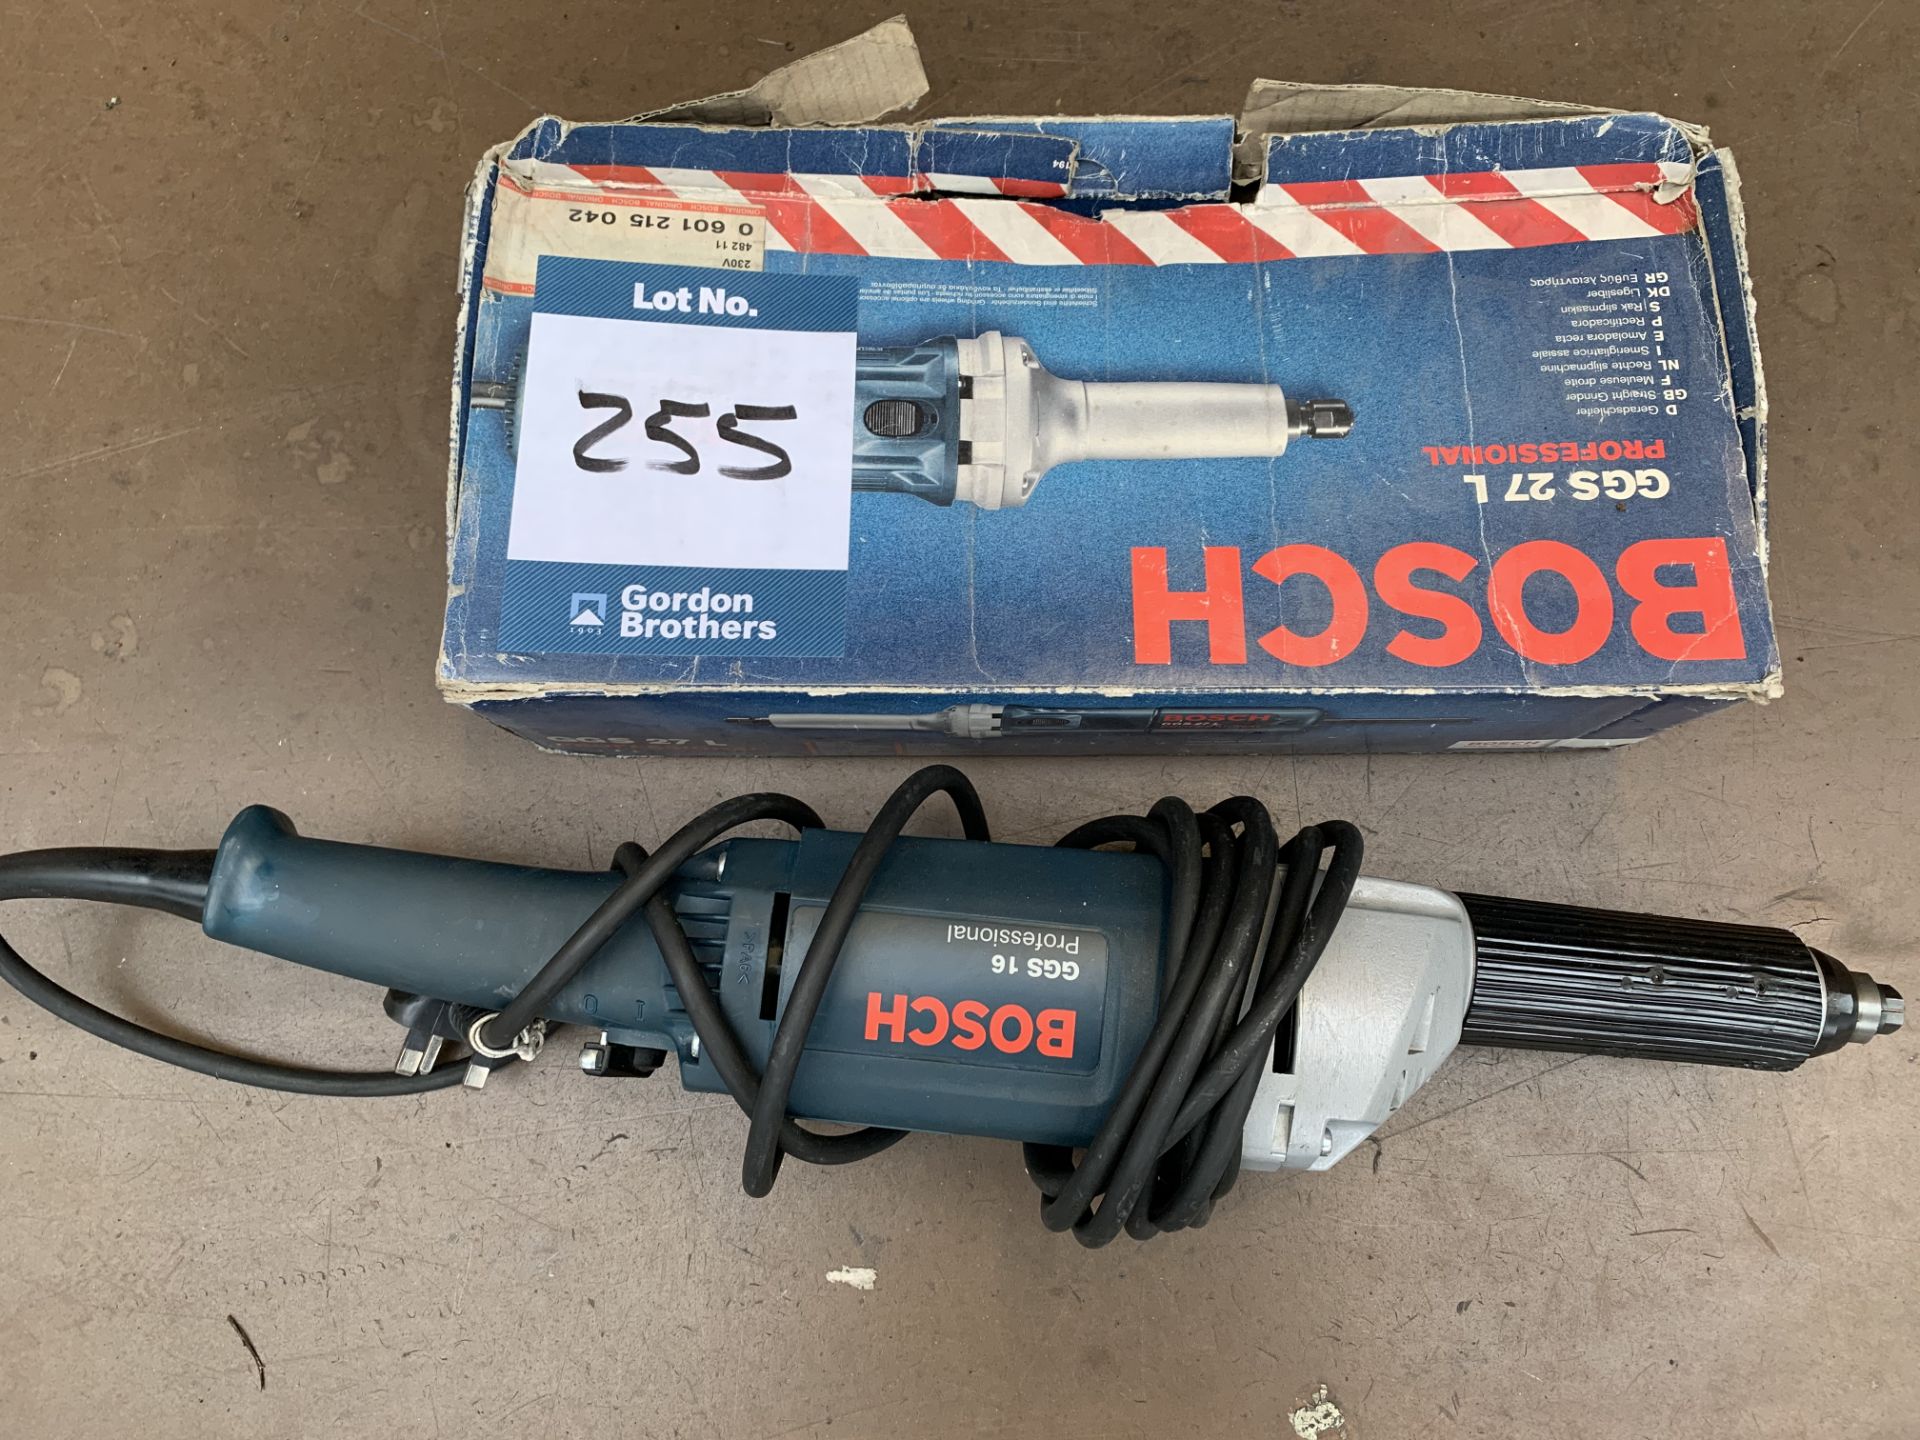 Bosch GGS16 straight grinder hand tool and Bosch GGS27L straight grinder hand tool (240v)